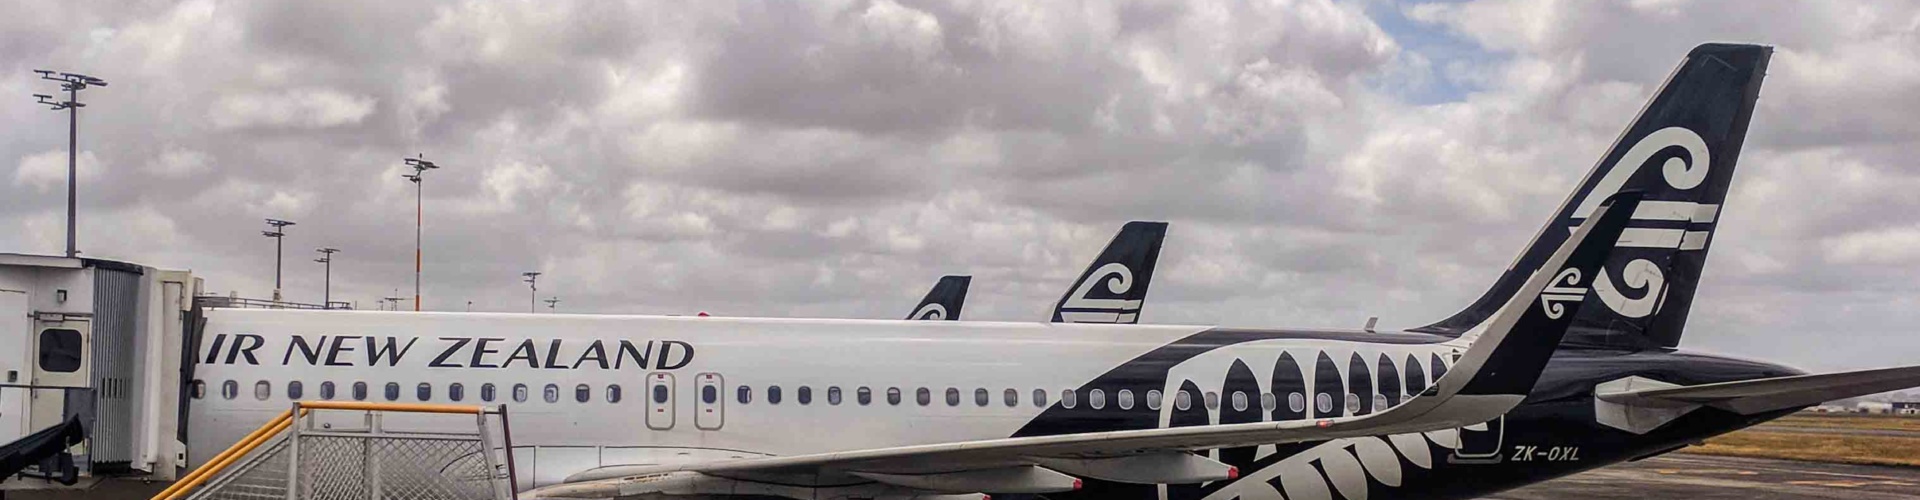 Following Tragedy, Air New Zealand Cancels Regional Flights to/from Christchurch